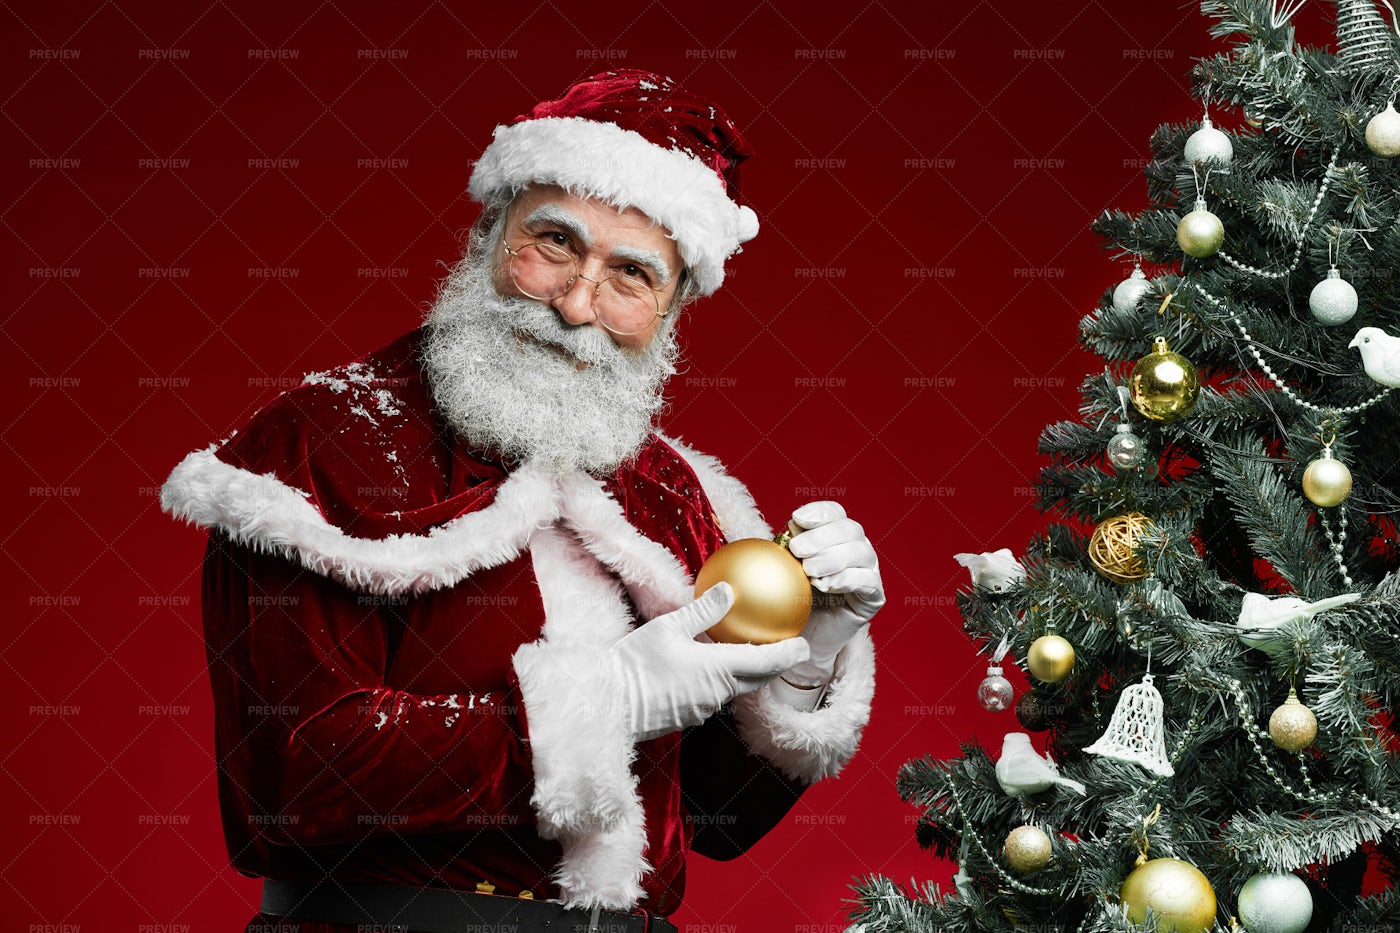 Smiling Santa Claus Standing By...: Stock Photos